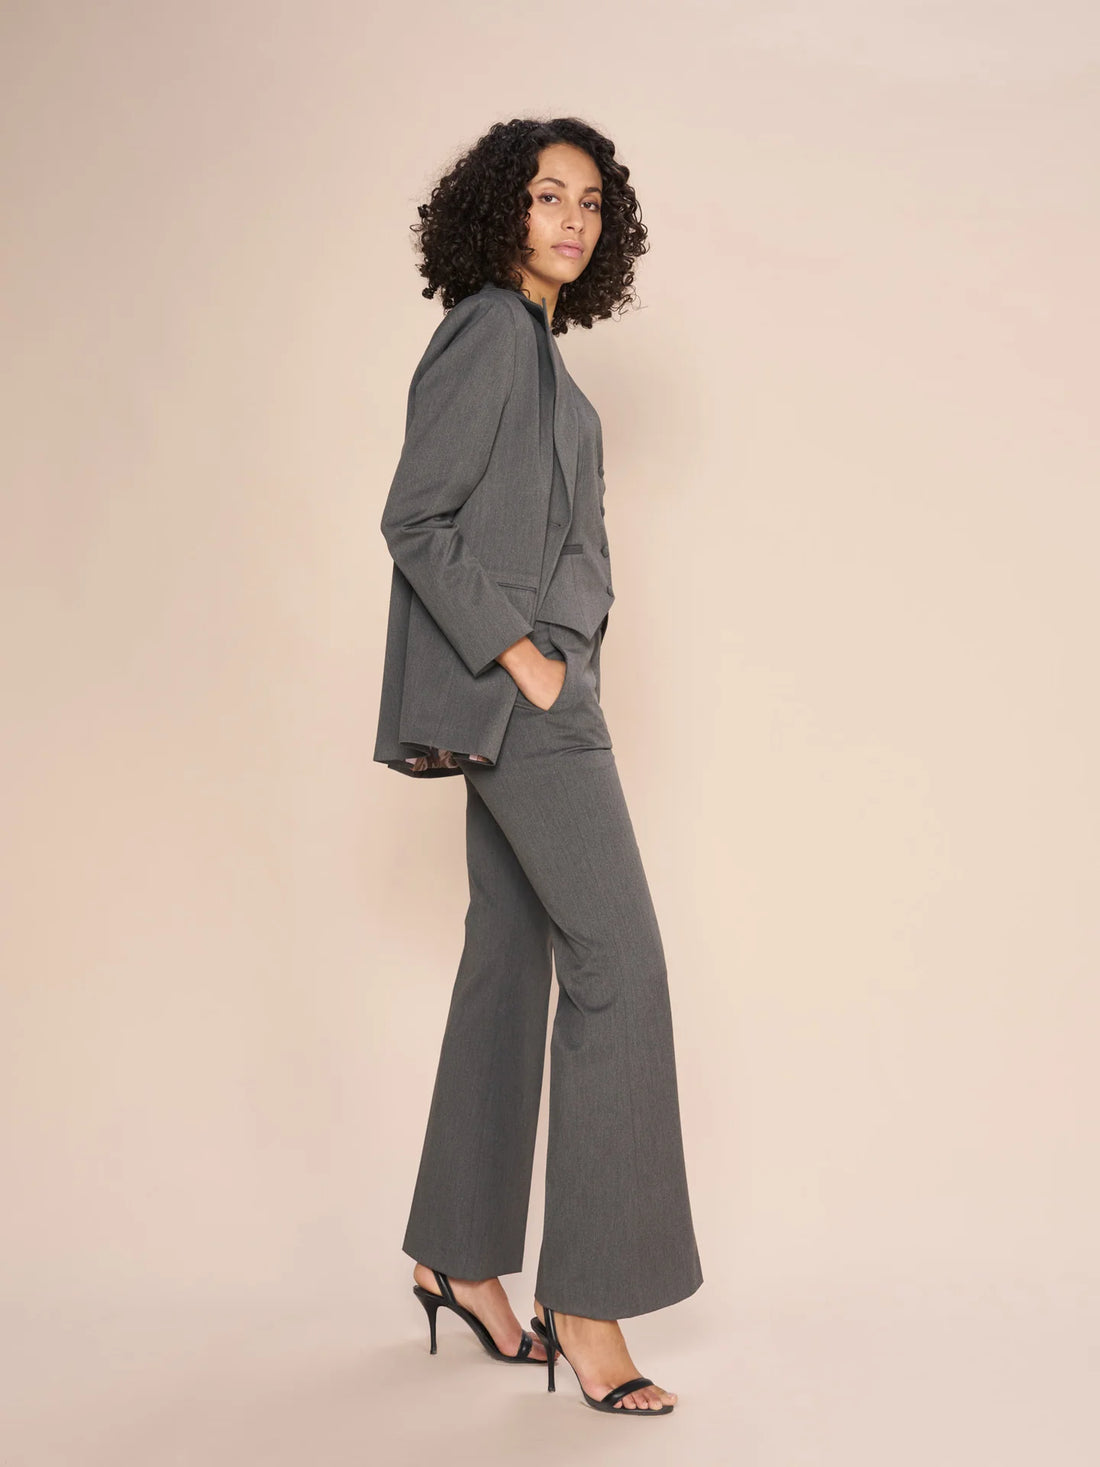 Buy Pink Straight Fit Trouser Pants Online - W for Woman